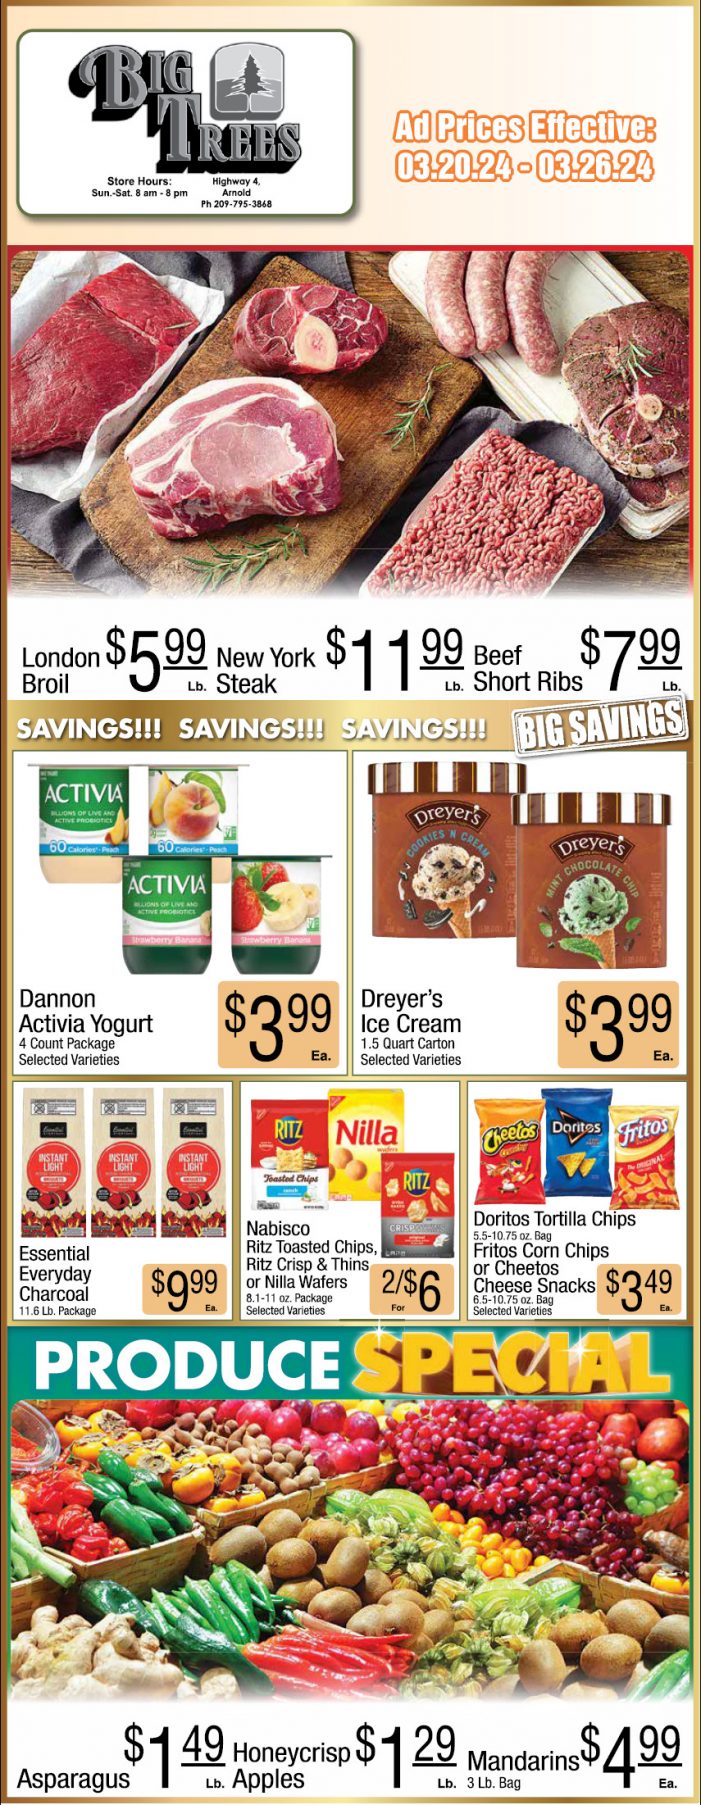 Big Trees Market Weekly Ad, Grocery, Produce, Meat & Deli Specials Through March 26th! Shop Local & Save!